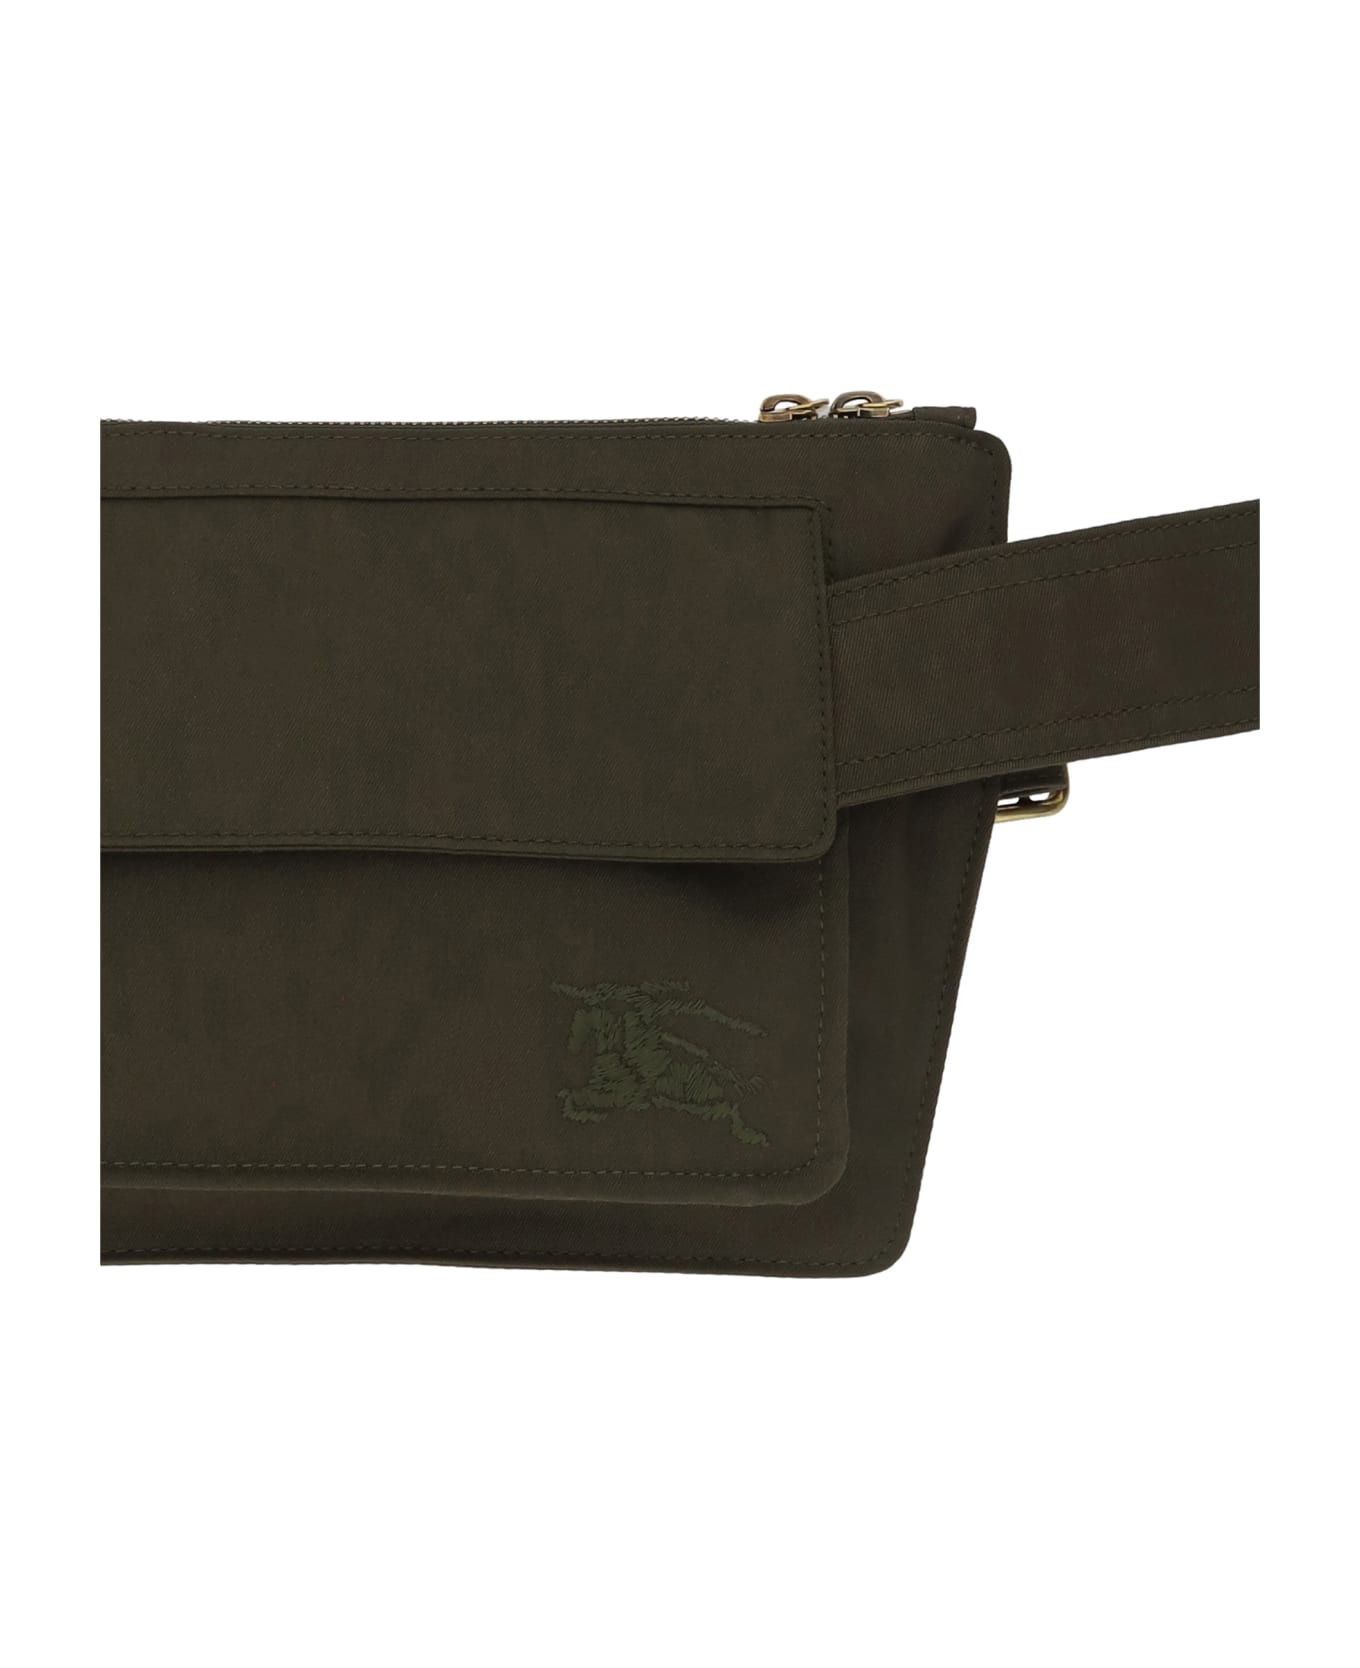 Burberry Trench Fanny Pack - Military